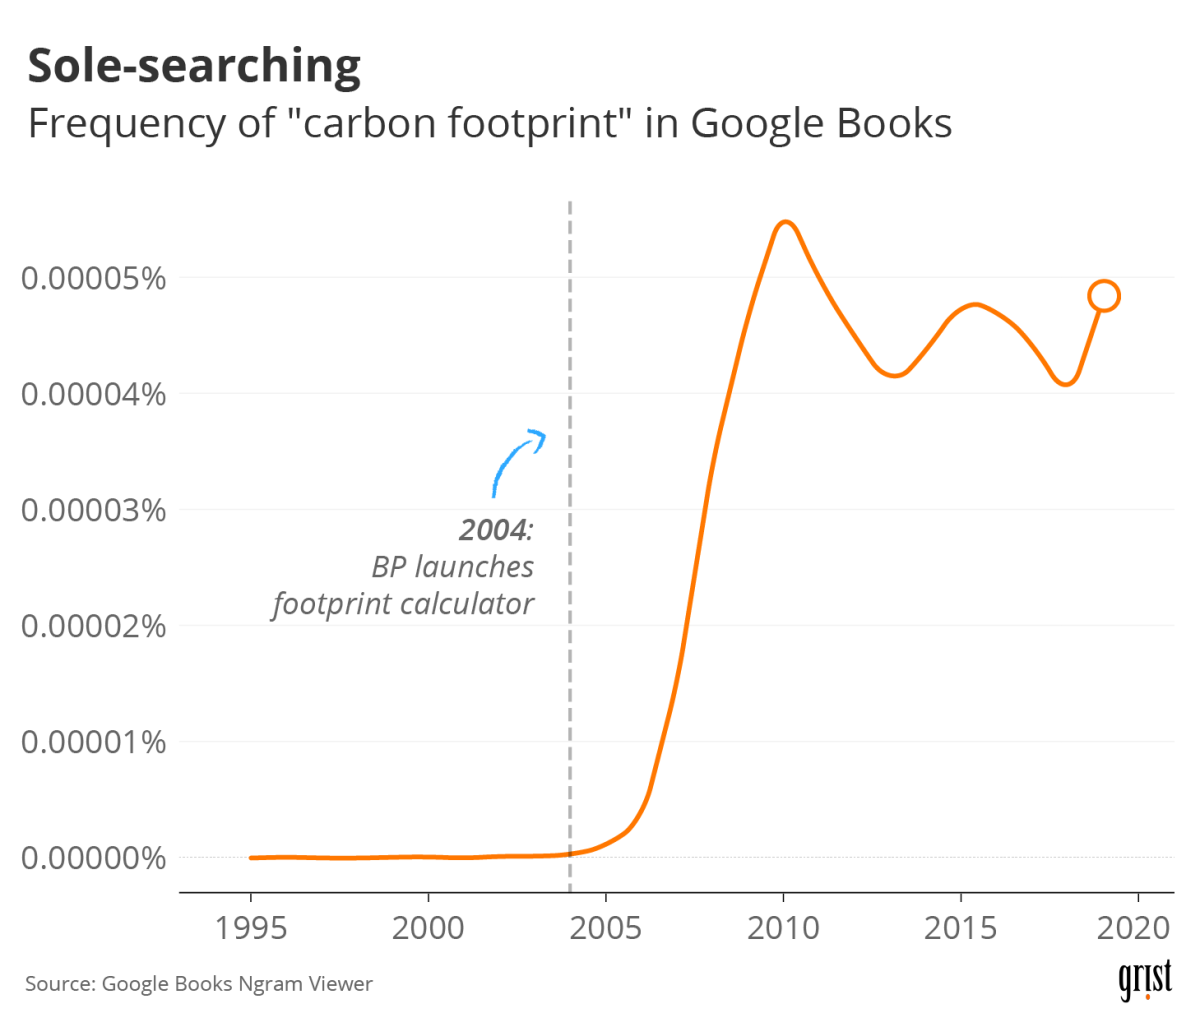 A line chart showing the frequency of the phrase "carbon footprint" in Google Books since 1995. In 2004, BP launched a footprint calculator. Beginning in 2005, the frequency of the phrase increased dramatically.